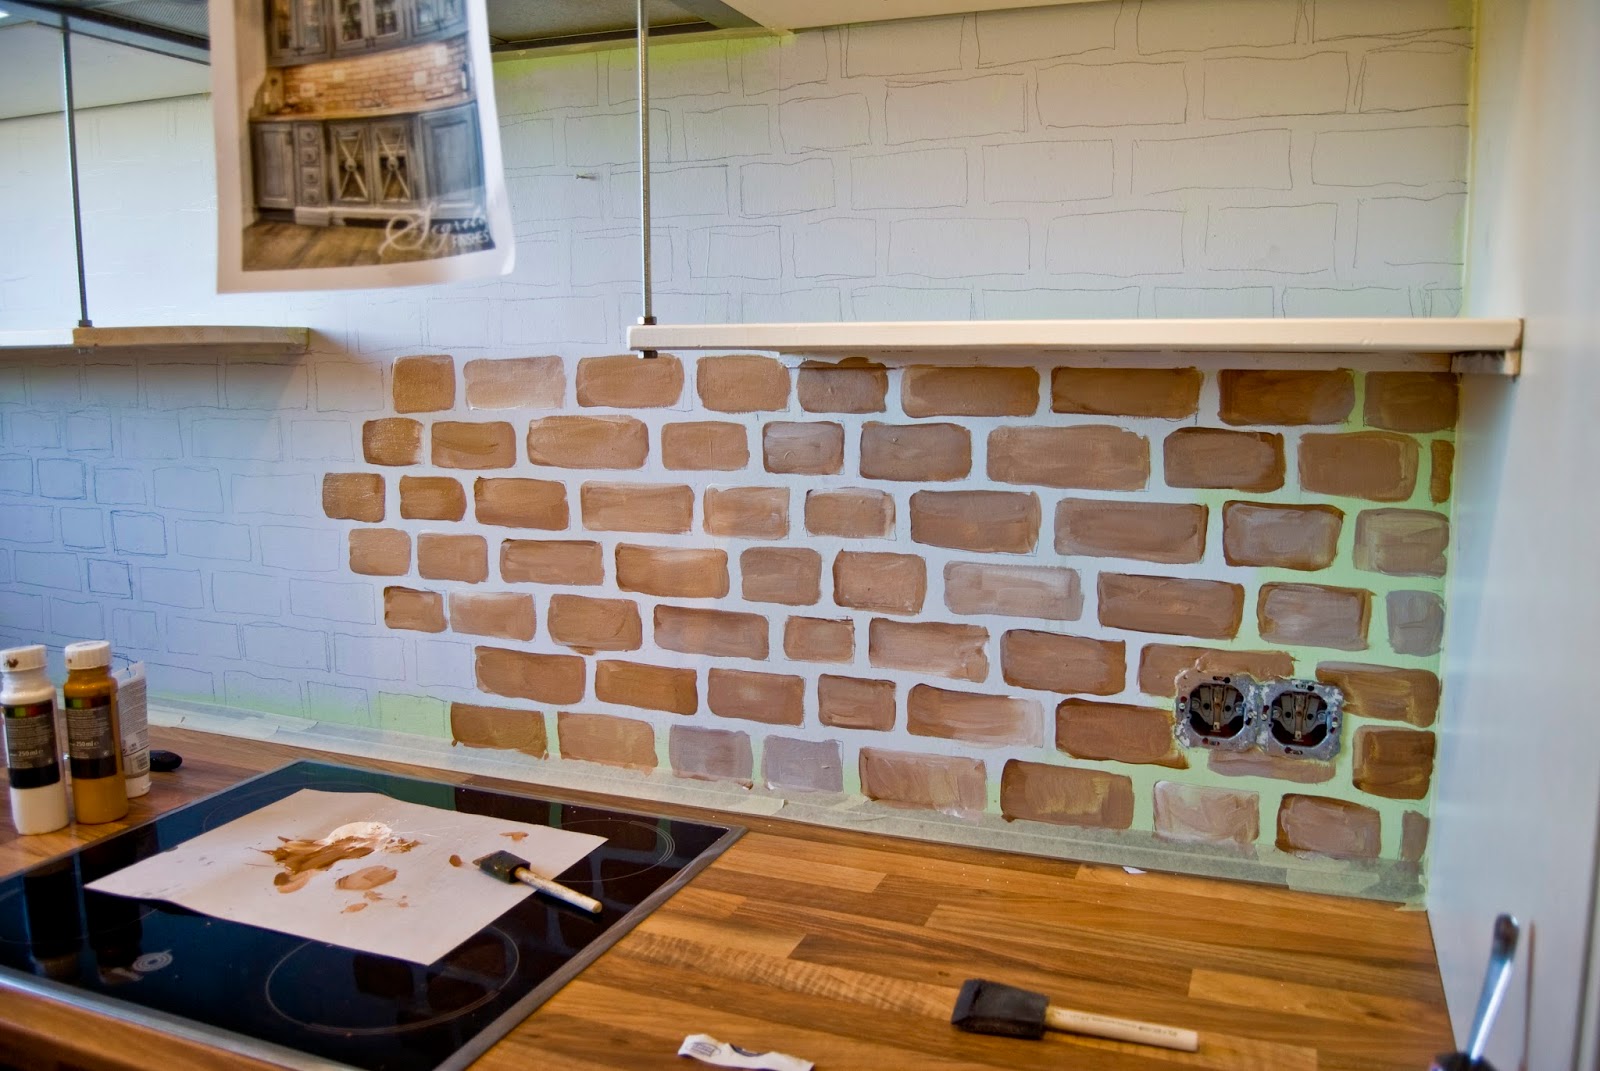 Kitchen with Brick Backsplash Beautiful How to Paint Brick Wall Paper From Kitchen Aol Image